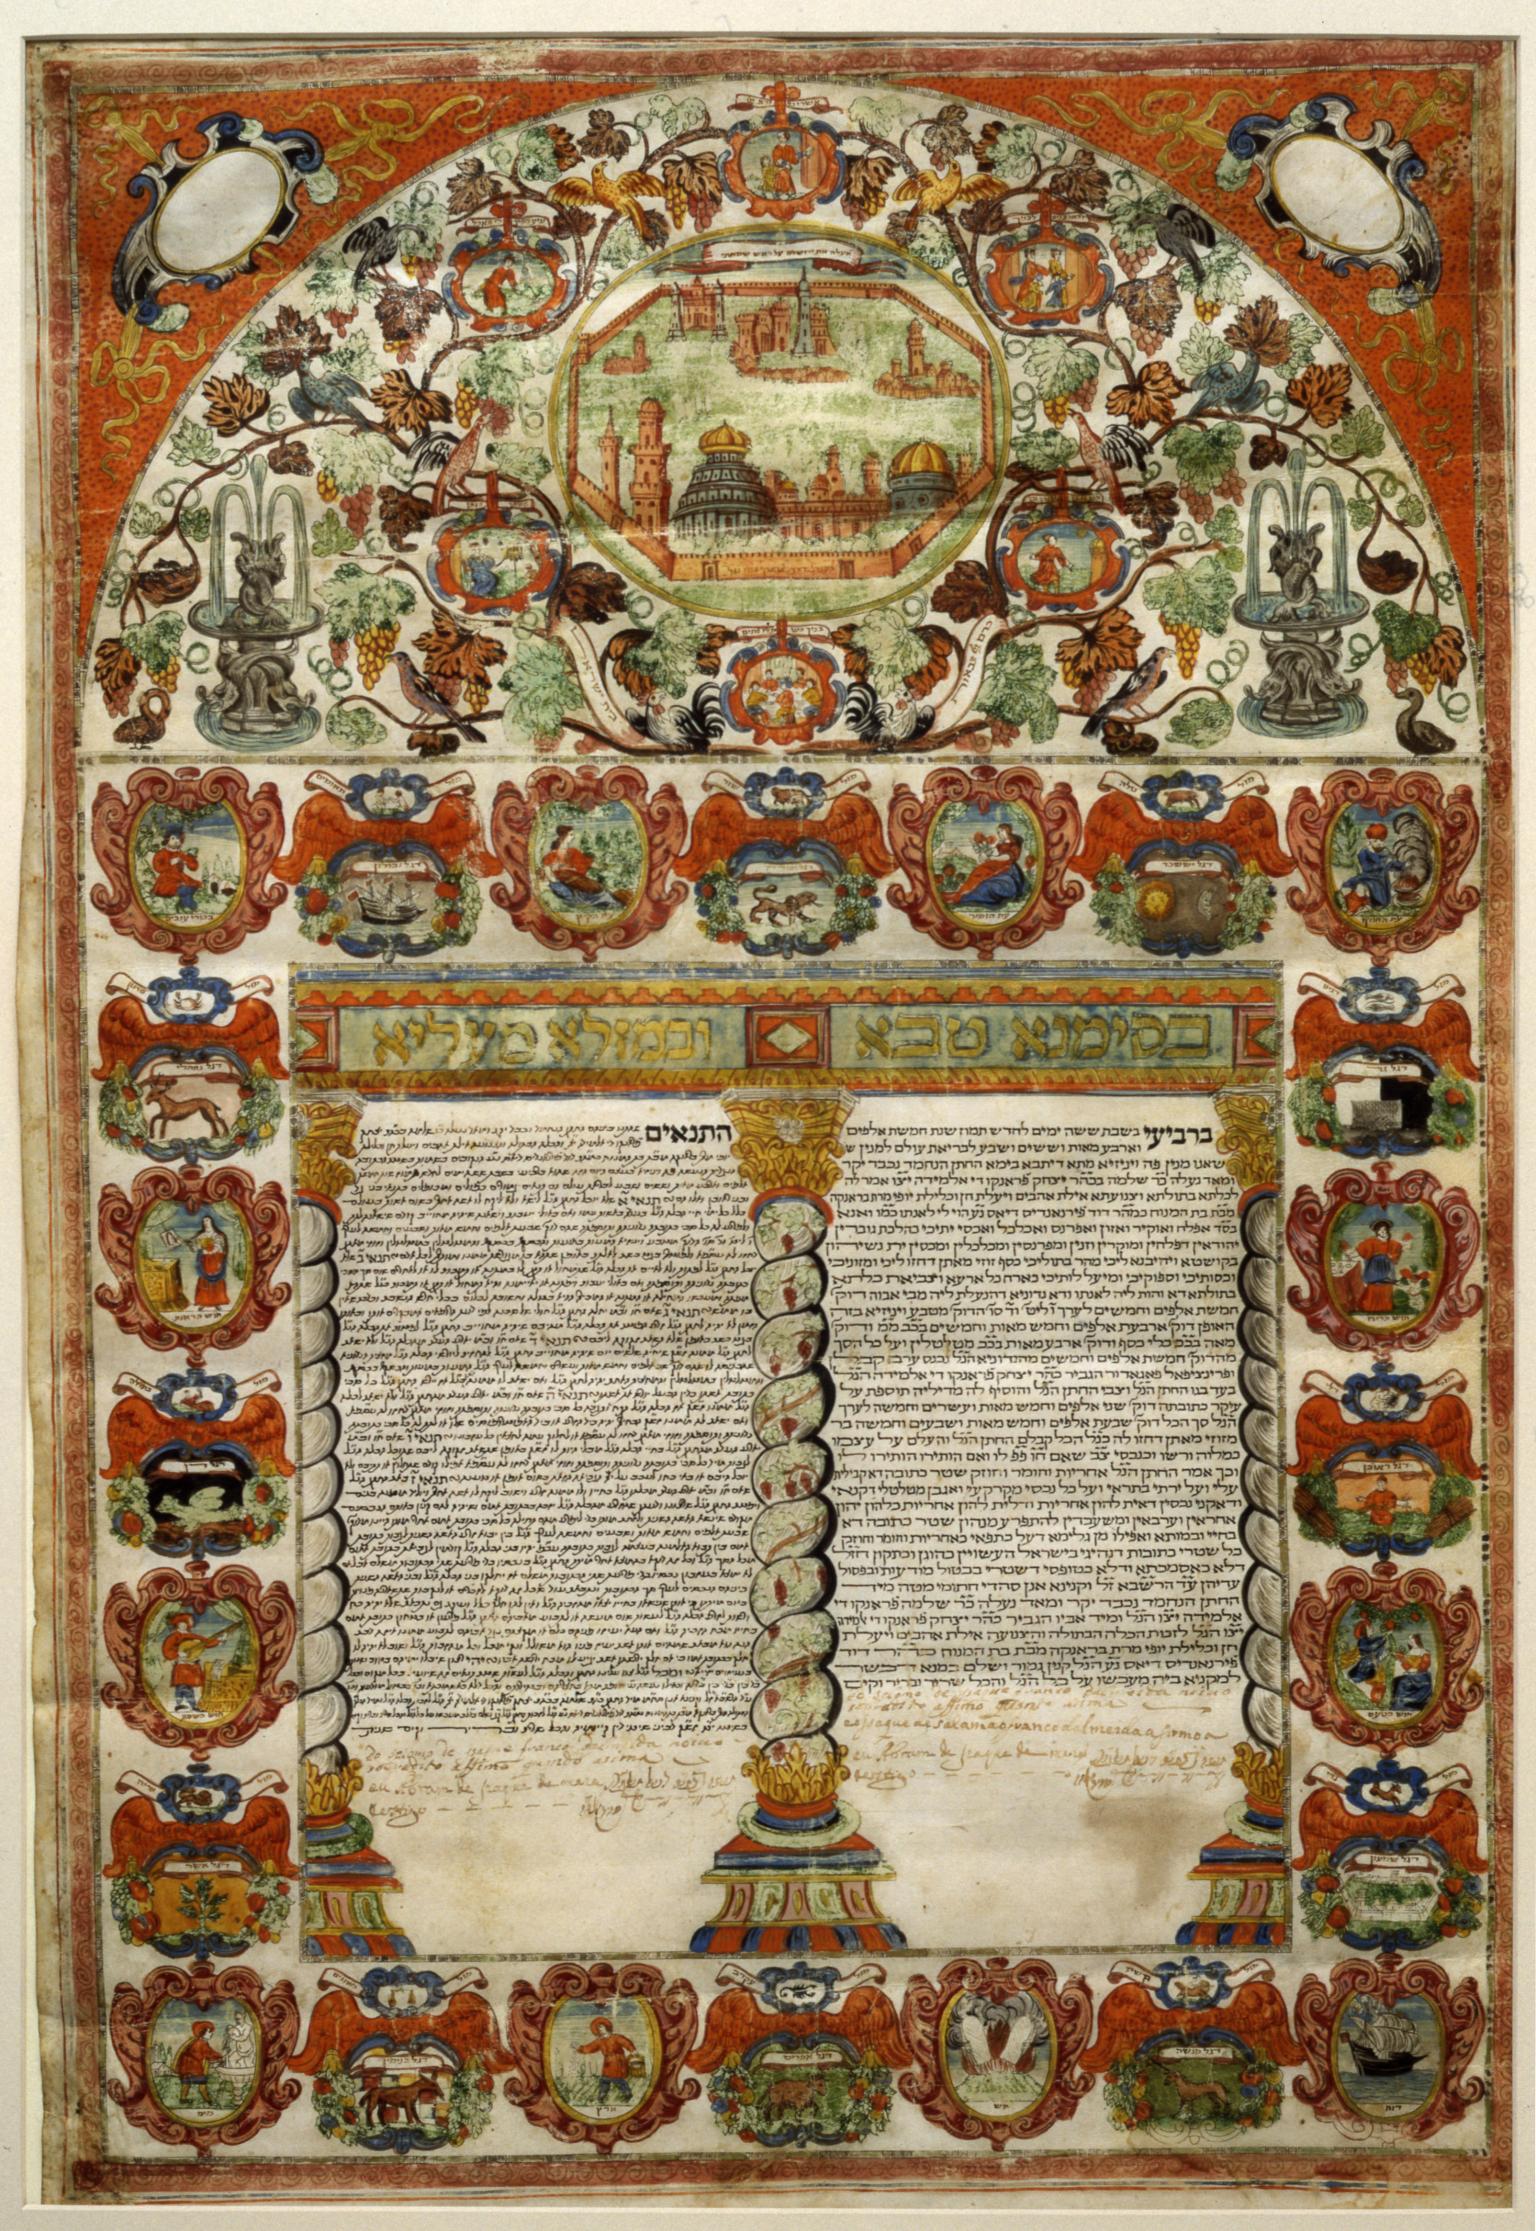 Page of Aramaic text with illustrations surrounding it, including heraldic shields around the text and a city, vines, flowers, and birds above text. 